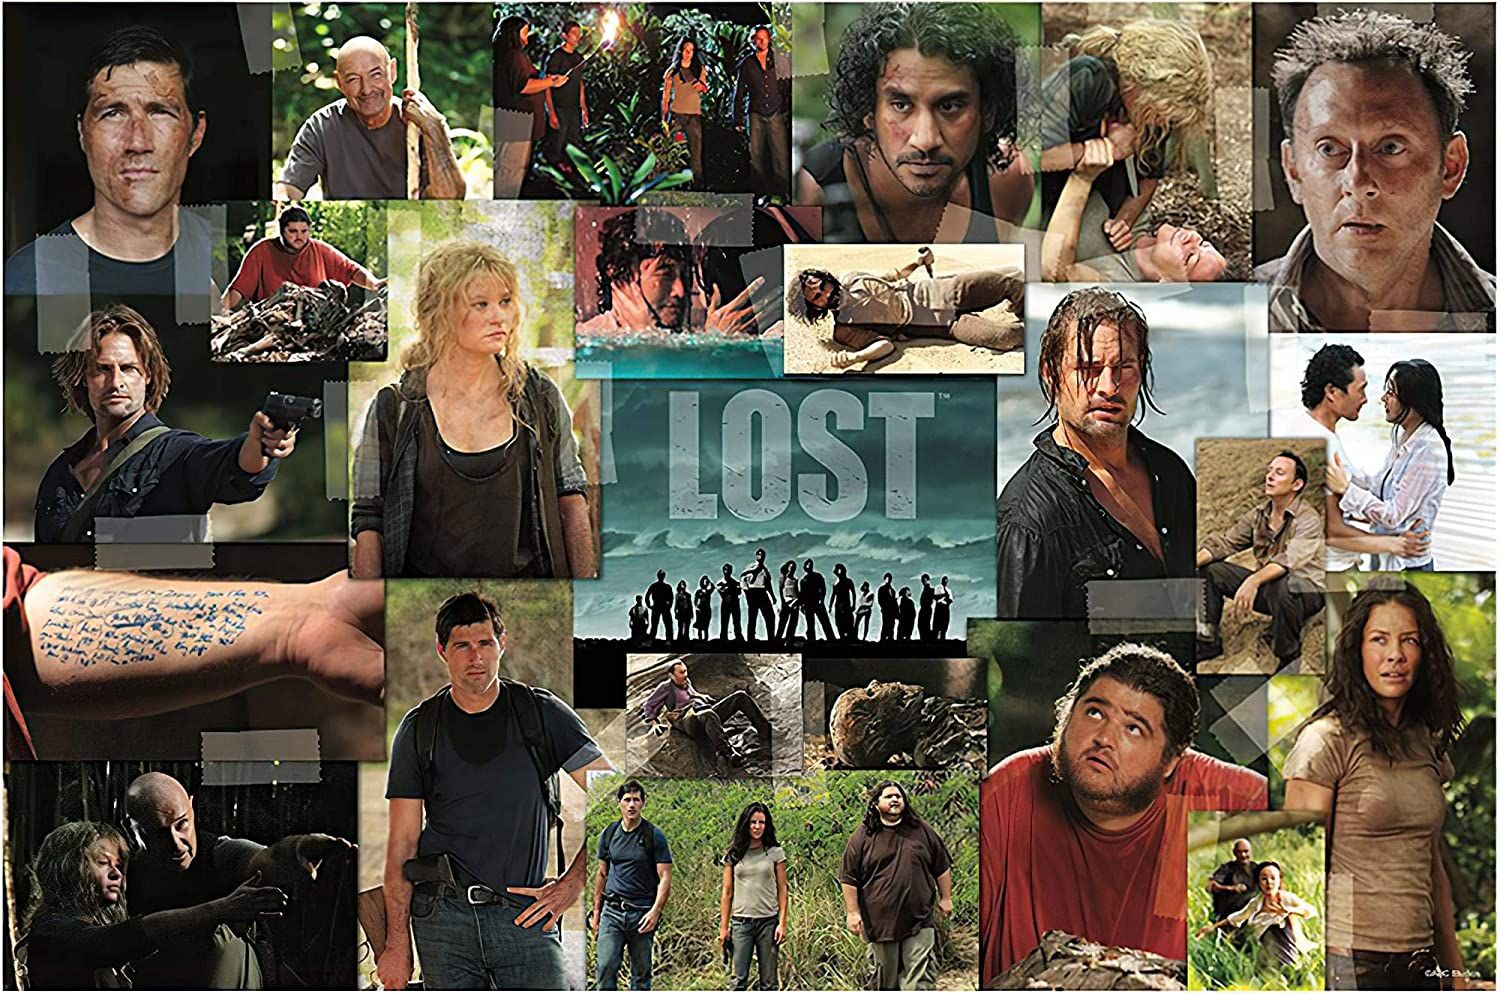 Lost TV Show Collage Puzzle for Adults and Kids 1